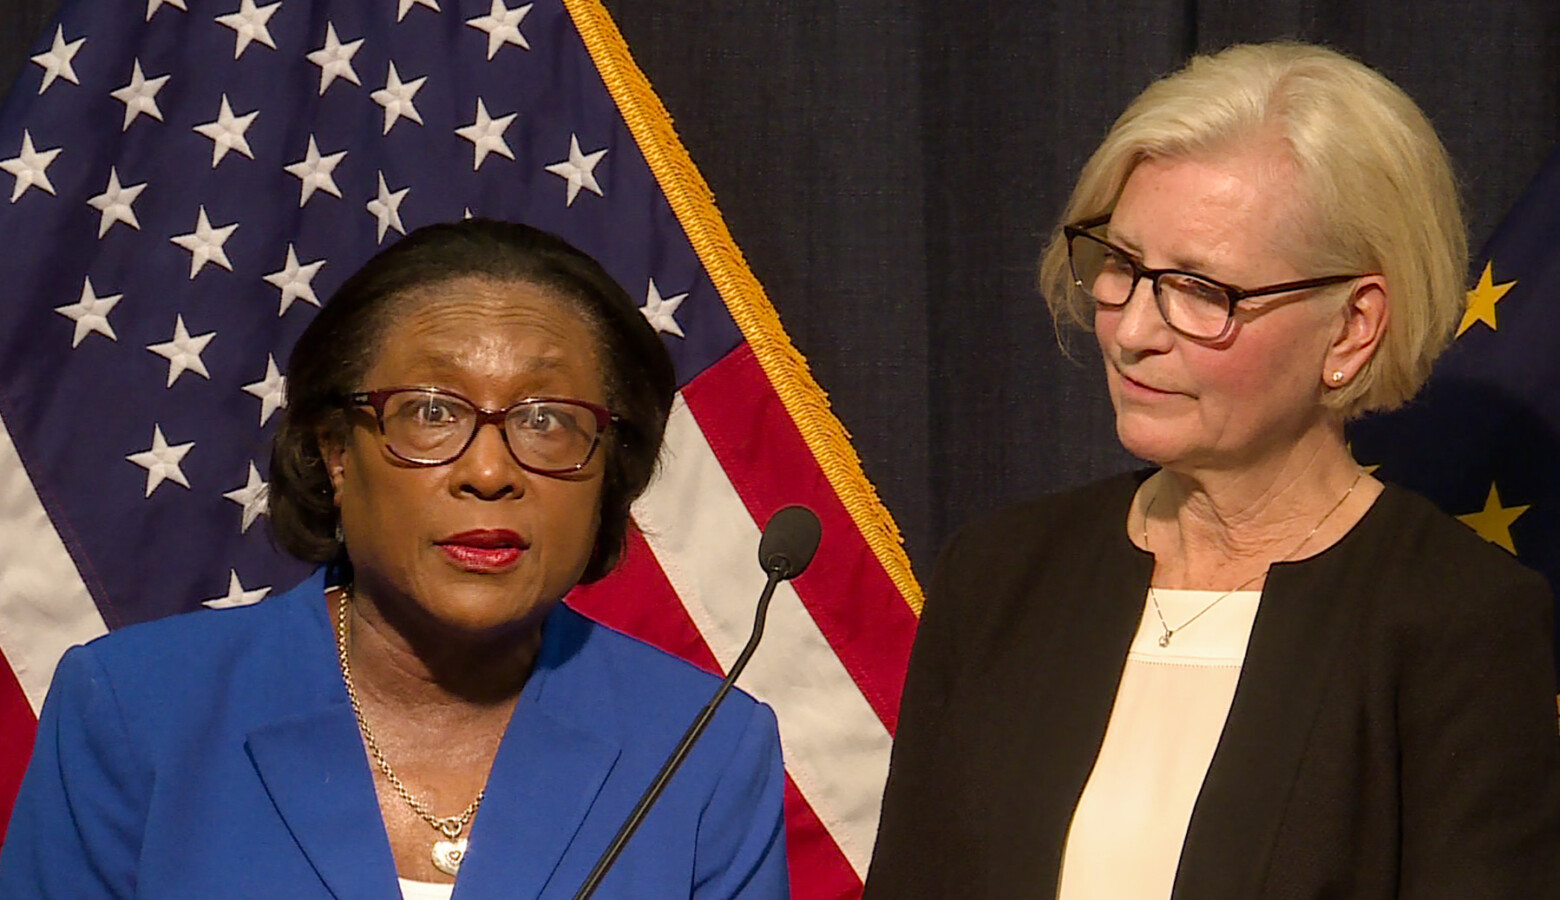 Marion County Health Department Director Virginia Caine and State Health Commissioner Kris Box speak at a press conference Friday. They say an adult man was at a conference in Boston where he was exposed to COVID-19. (Lauren Chapman/IPB News)